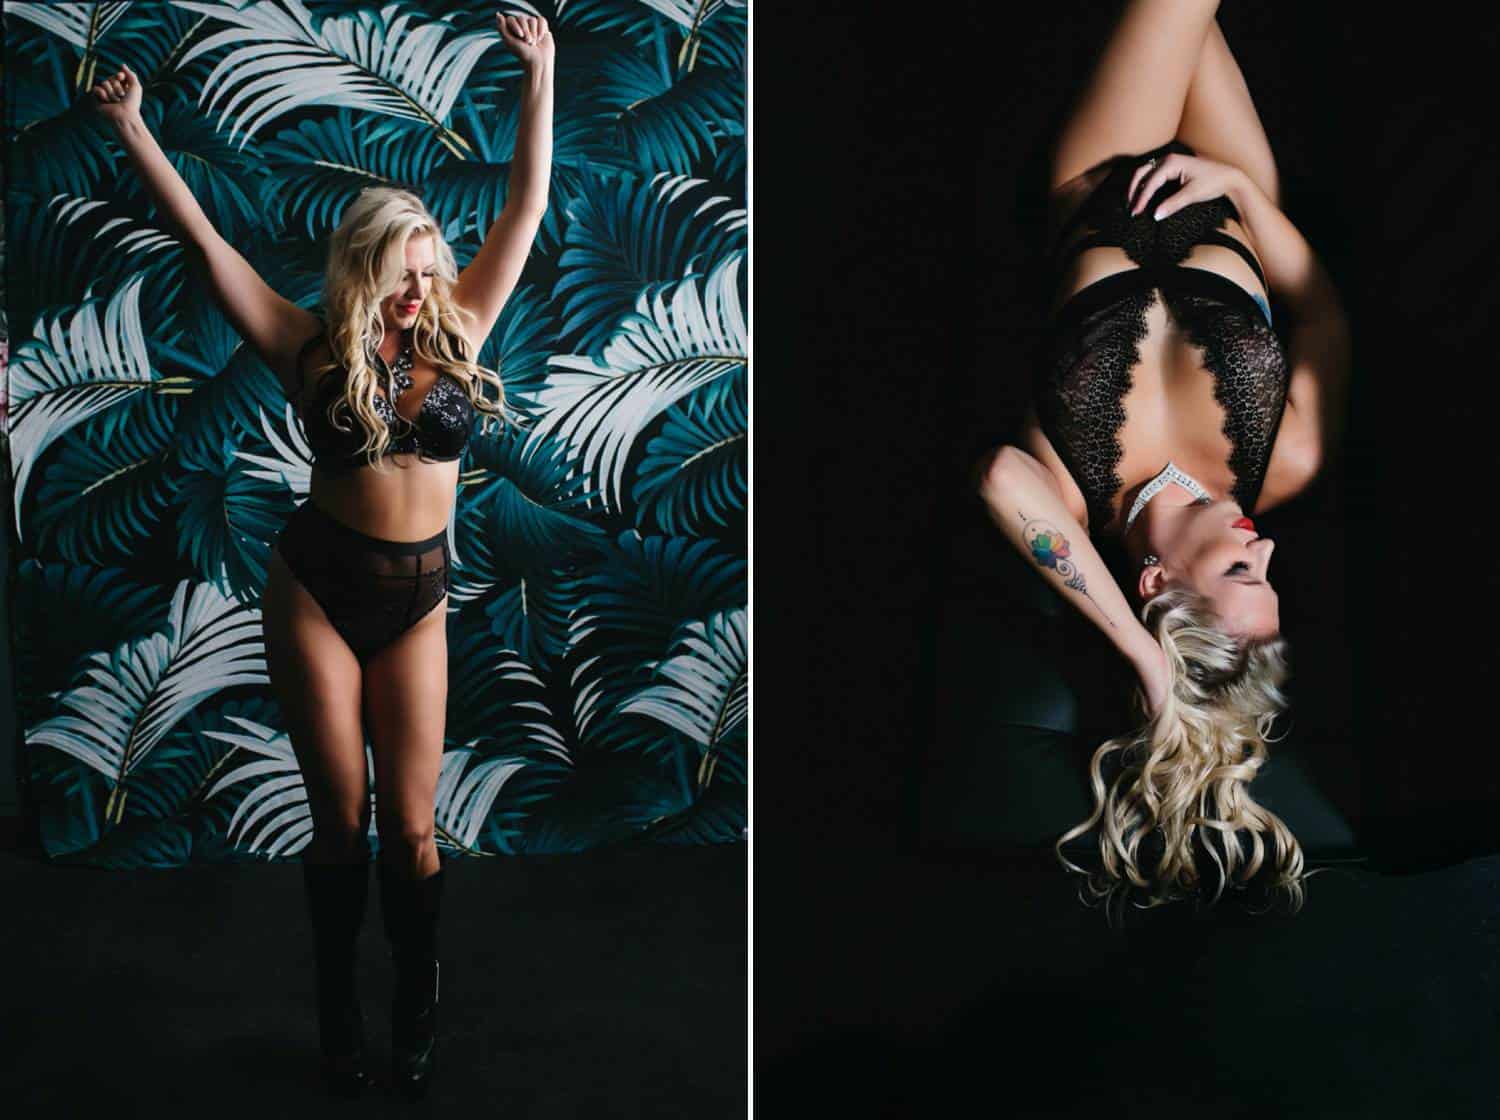 Two photos of a blonde woman in black lingerie show her posing happily in front of a fern-printed wallpaper, then lying on a bed with one hand tracing through her hair. Learn how to take boudoir photos like these from Cole's Classroom online!